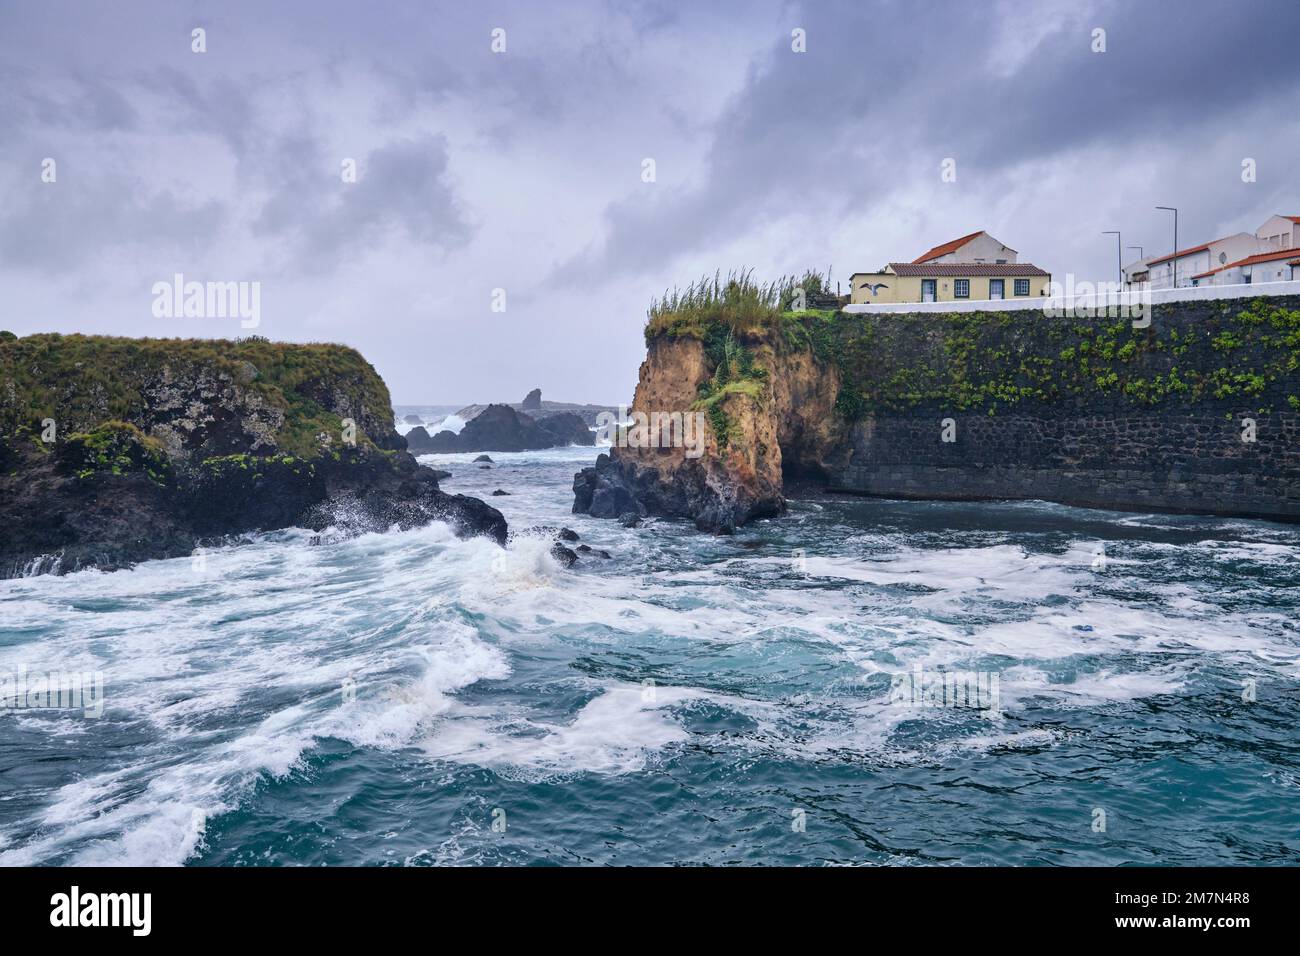 The old harbour of Santa Cruz on a stormy day. Flores island, Azores islands. Portugal Stock Photo